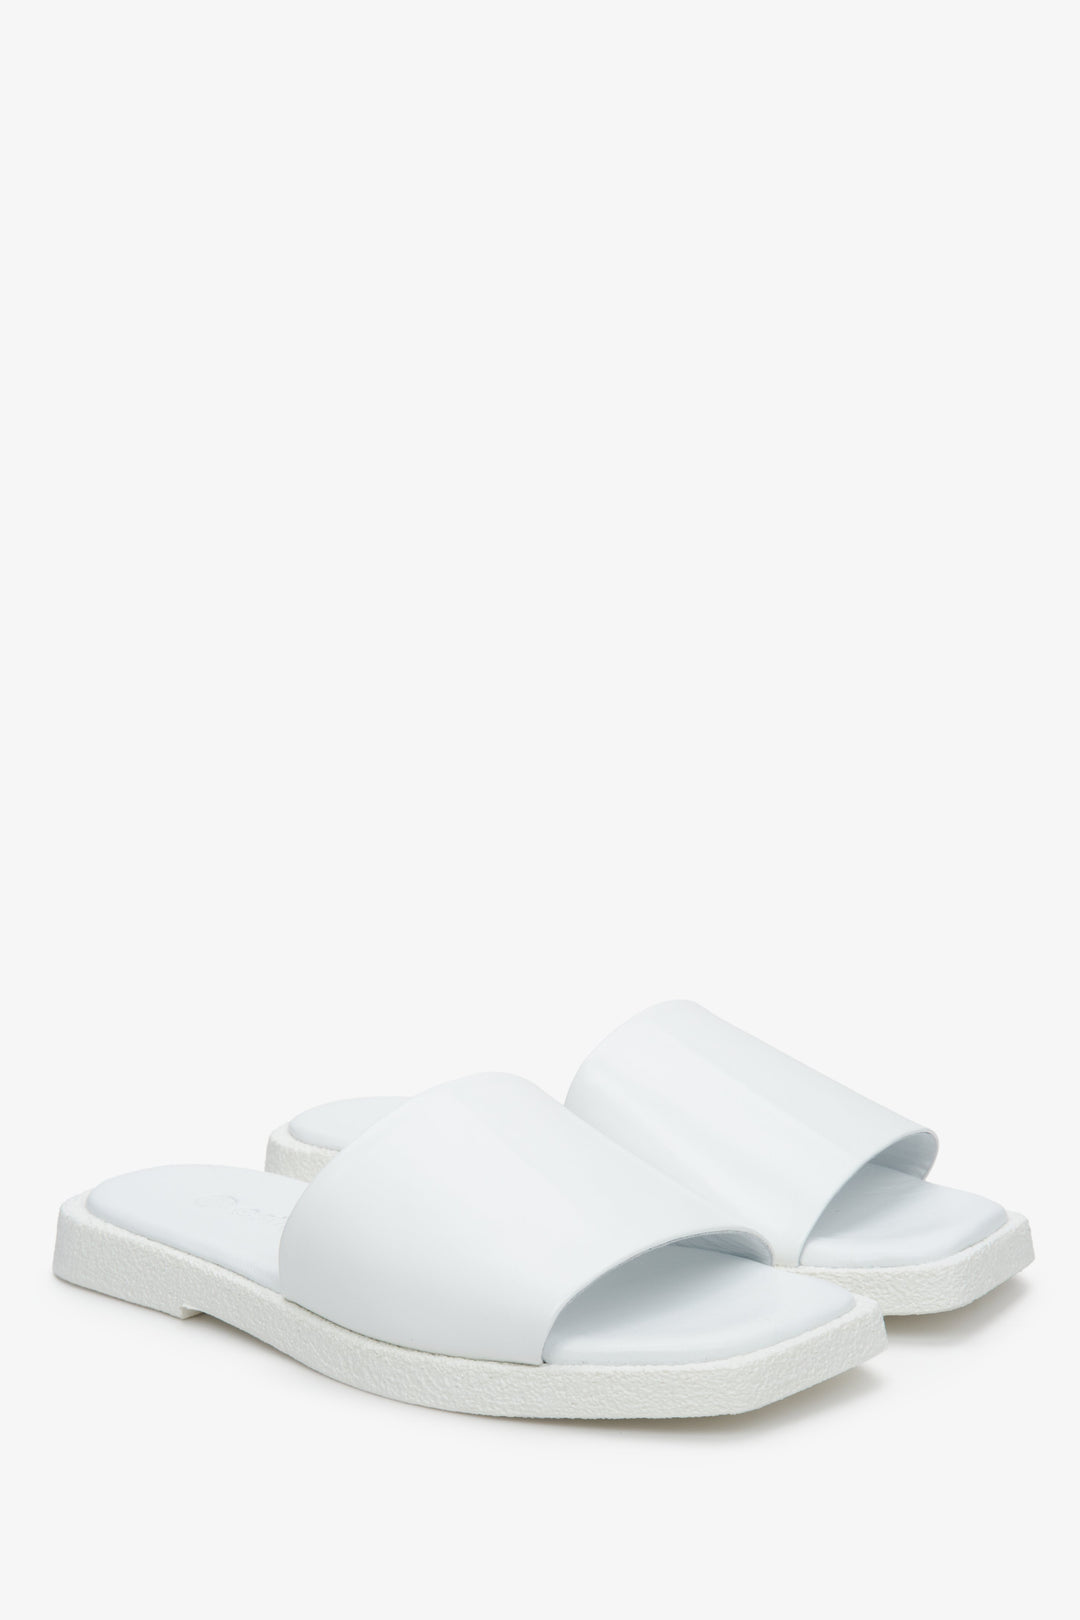 Women's white slides made of Italian leather - presentation of the top and side seam of the shoes.